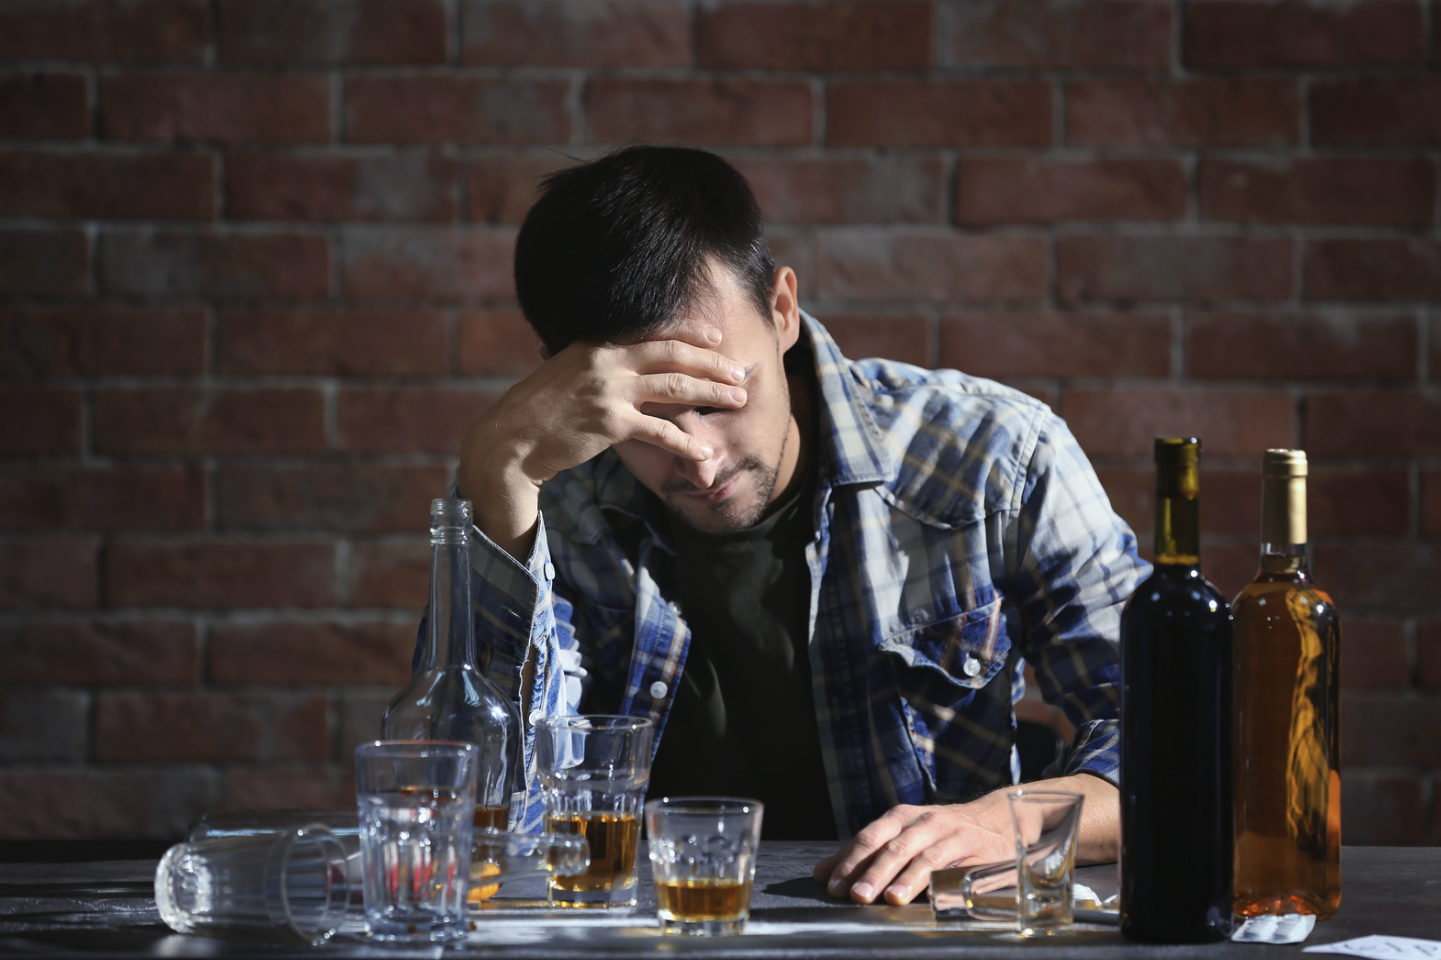 Man struggling with drinking alcohol.